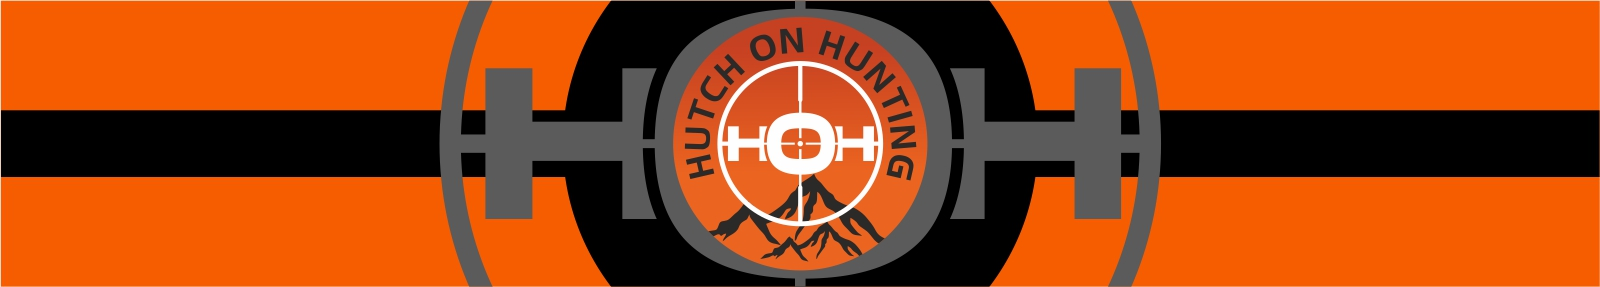 Hunt the Rocky Mountains with Hutch On Hunting